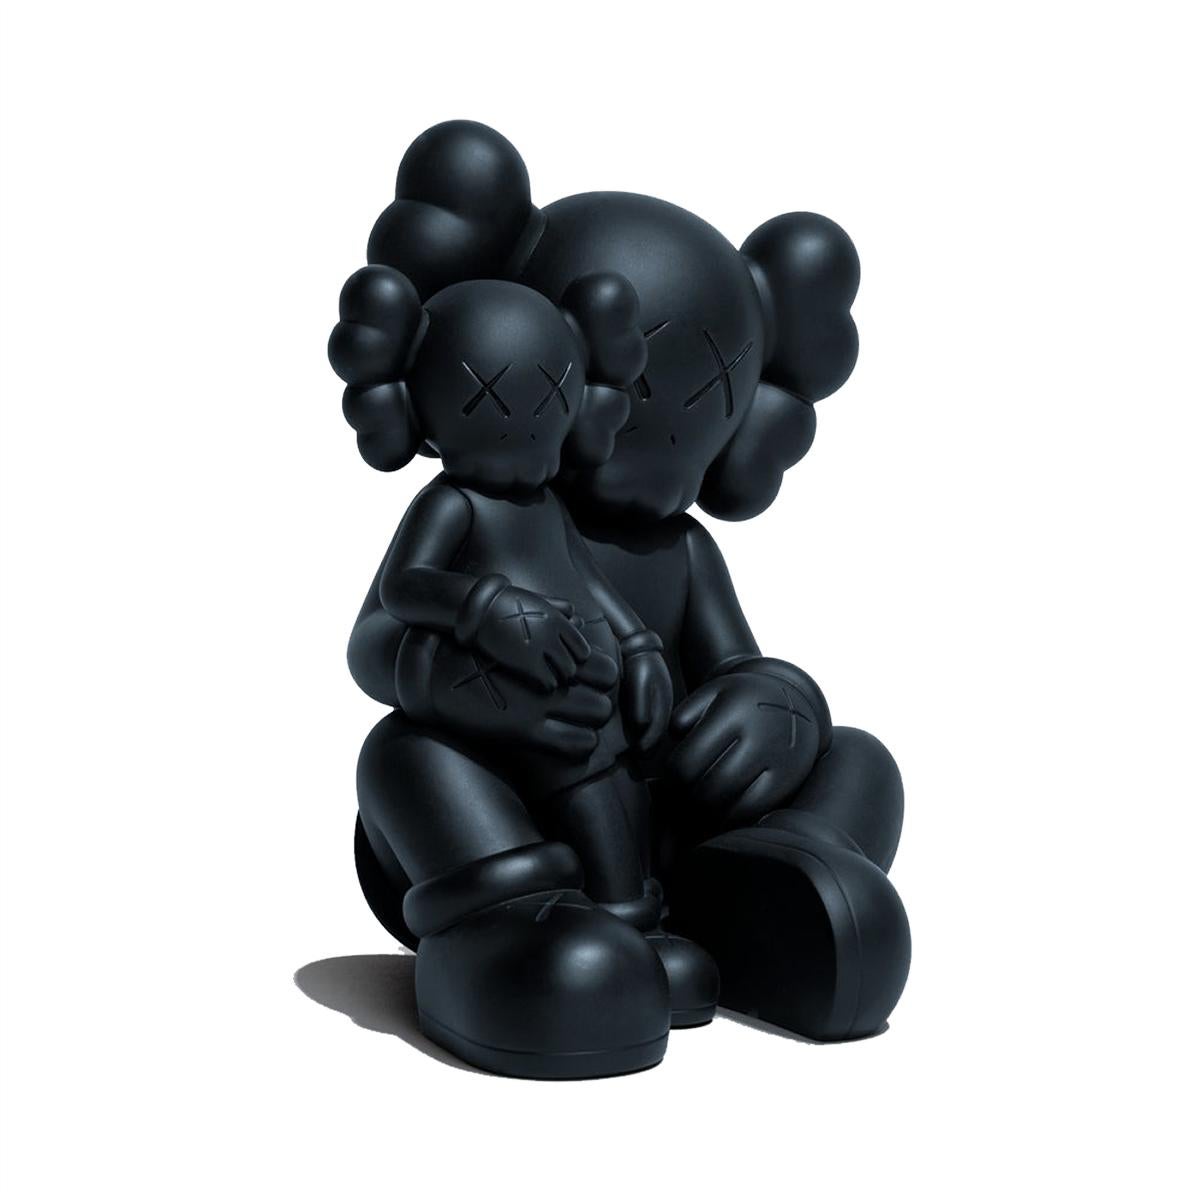 KAWS Holiday Changbai Mountain (KAWS black Changbai):
A beautifully composed KAWS COMPANION published to commemorate KAWS' larger-scale sculpture of same, at Changbai Mountain in Jilin Province, China. The piece features the signature KAWS Companion